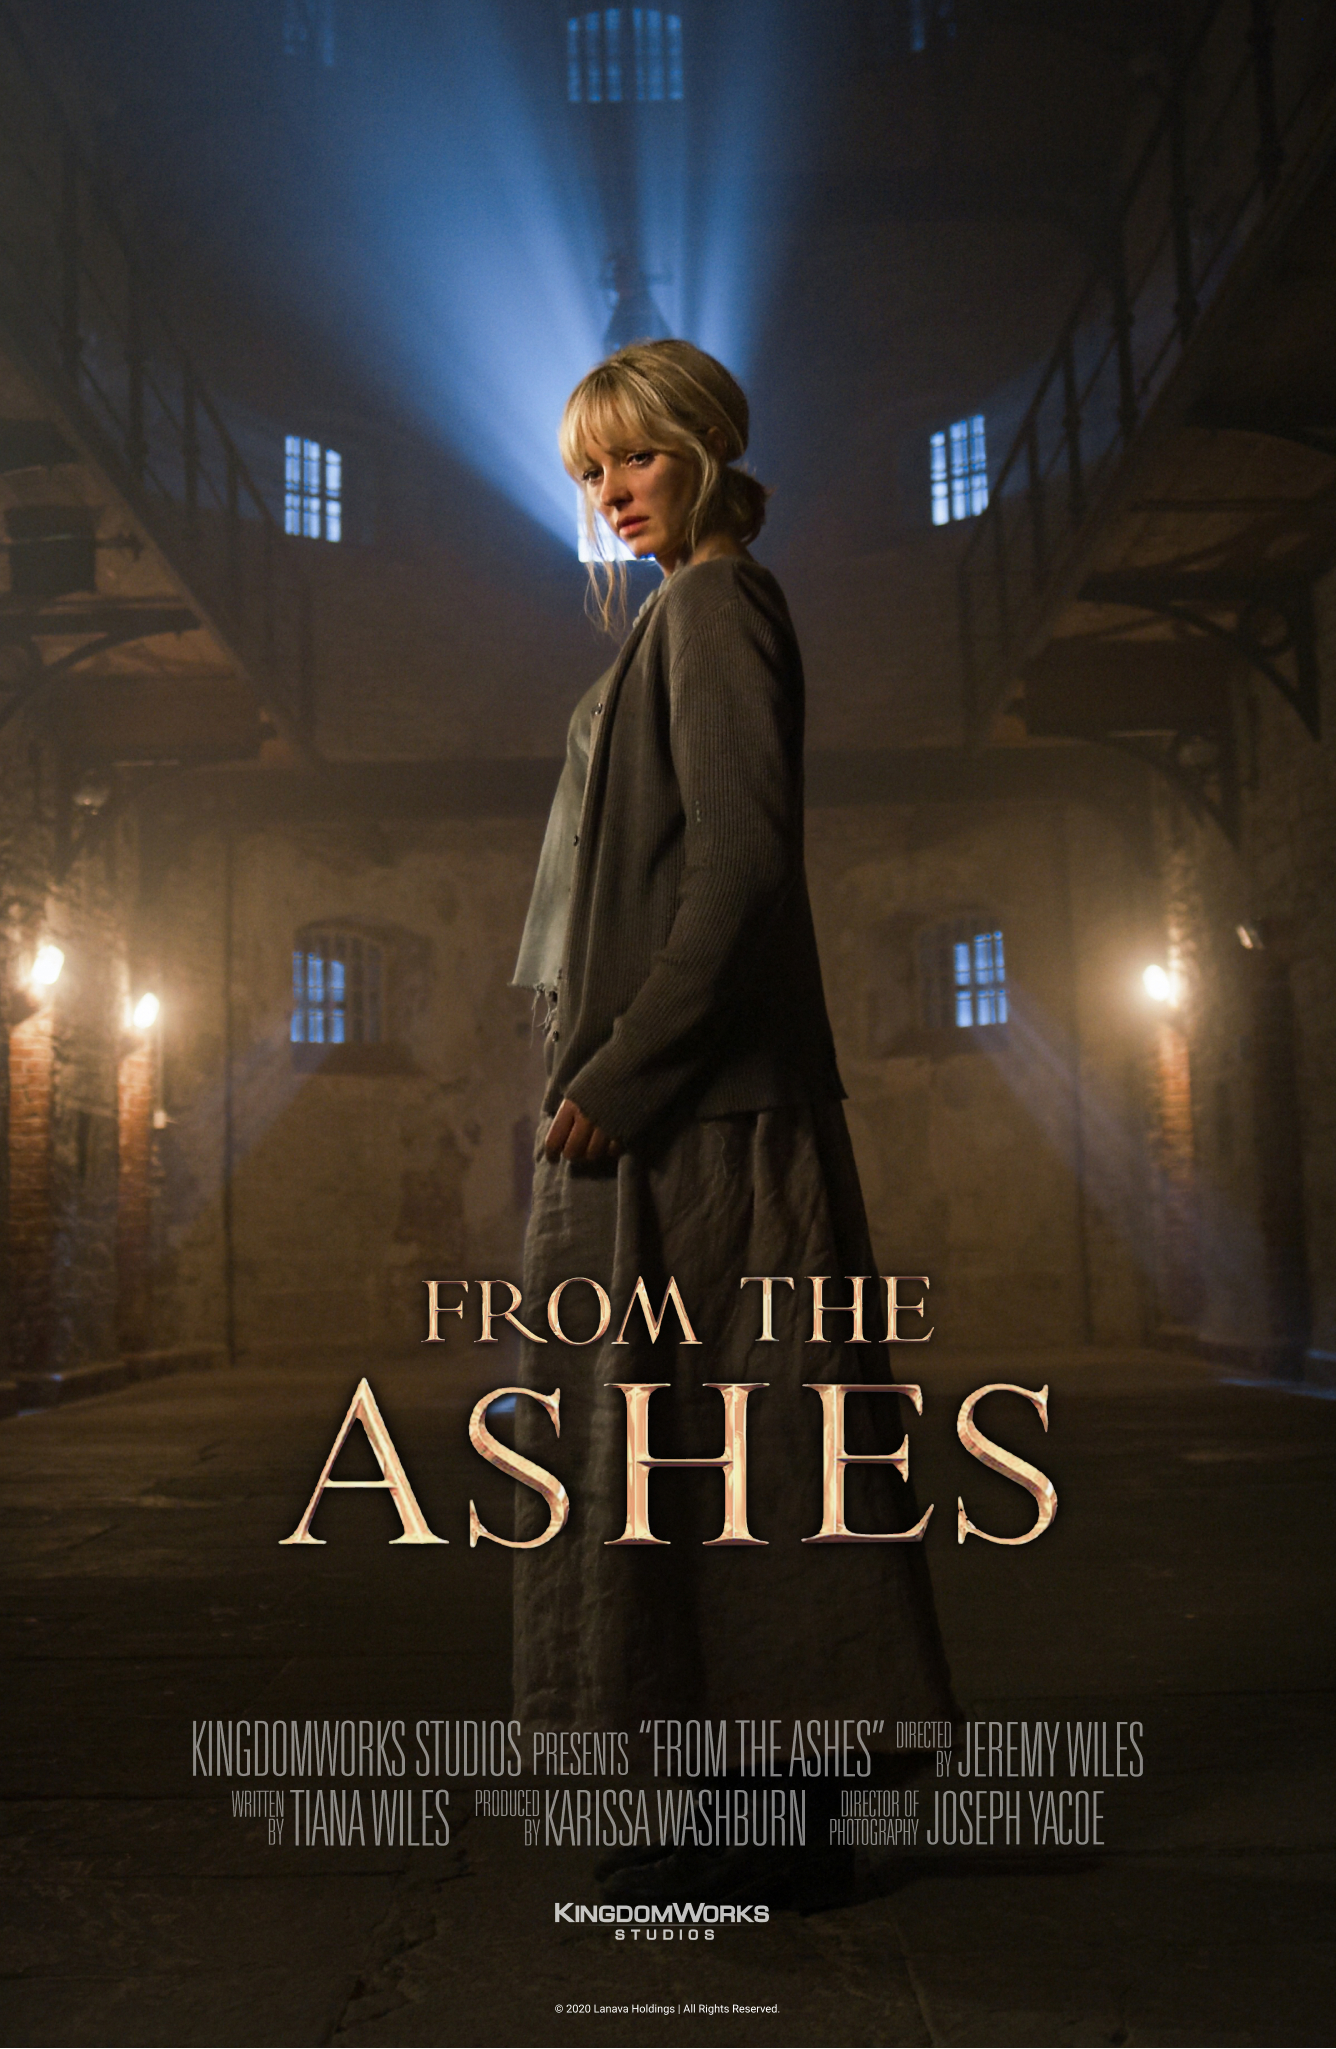 https://kingdomworks.com/films/from-the-ashes/